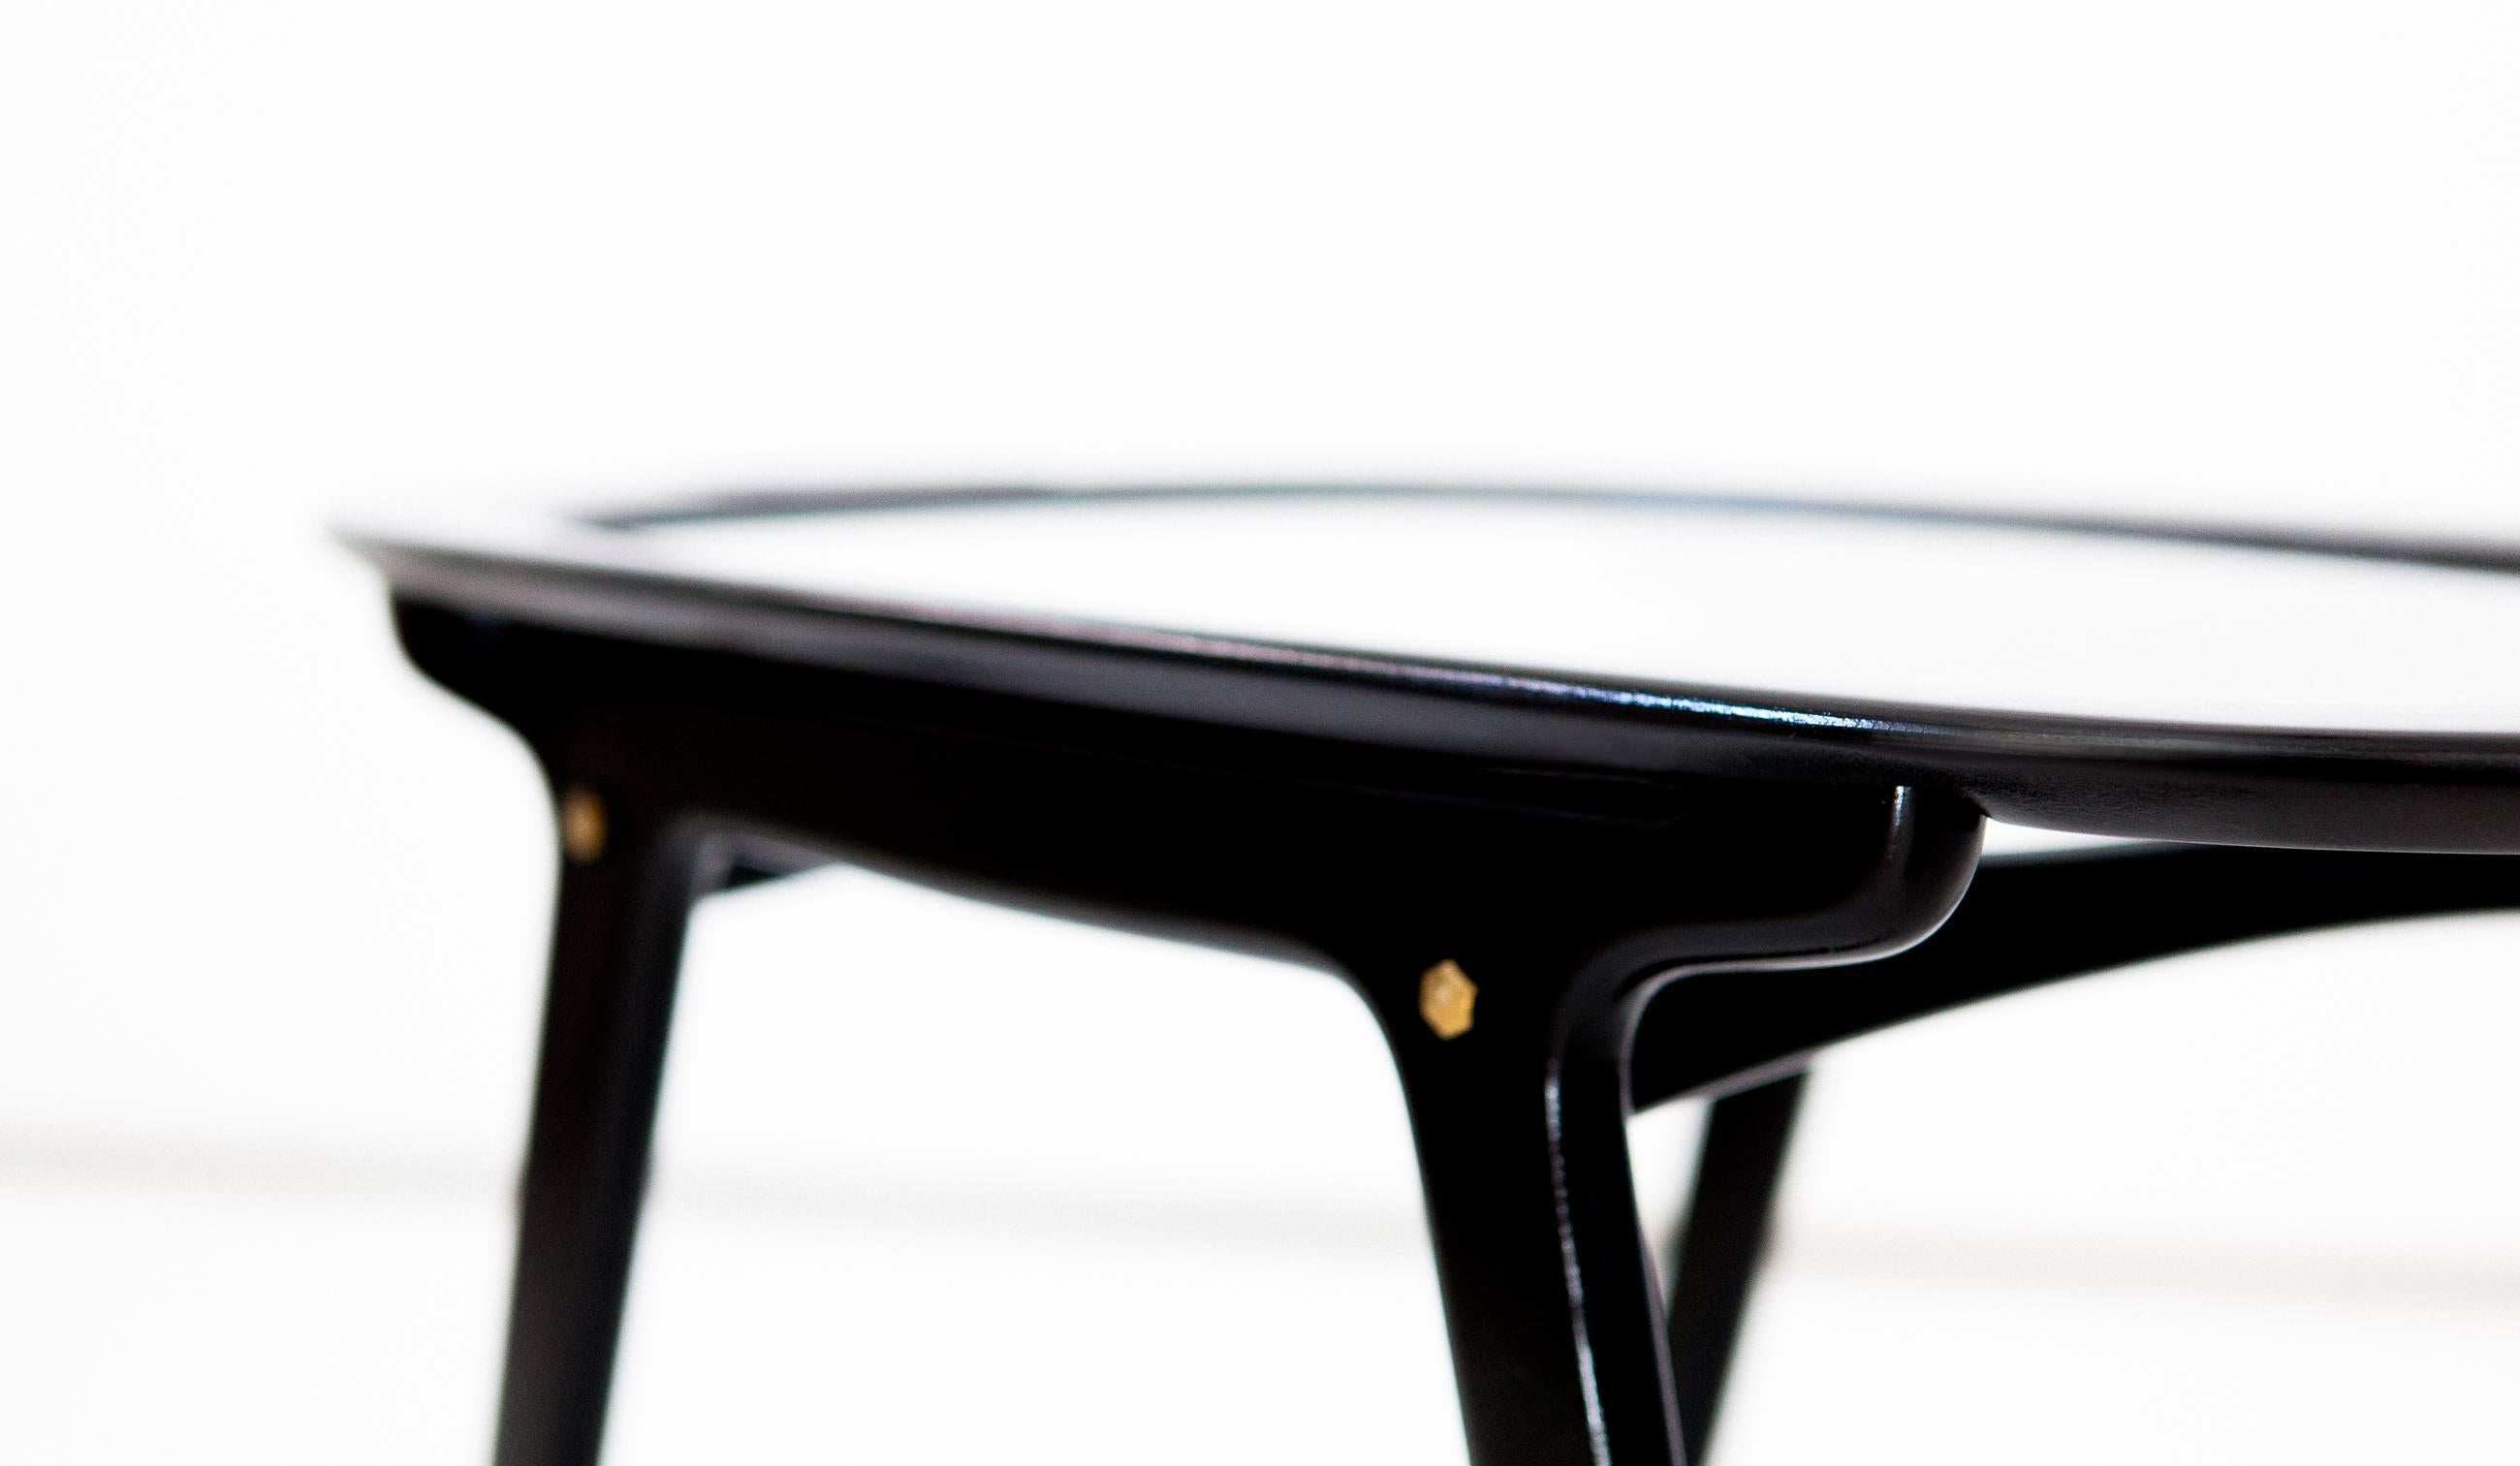 Italian Black Wood and Glass Coffee or Service Table by Cesare Lacca, 1950s (Mitte des 20. Jahrhunderts)